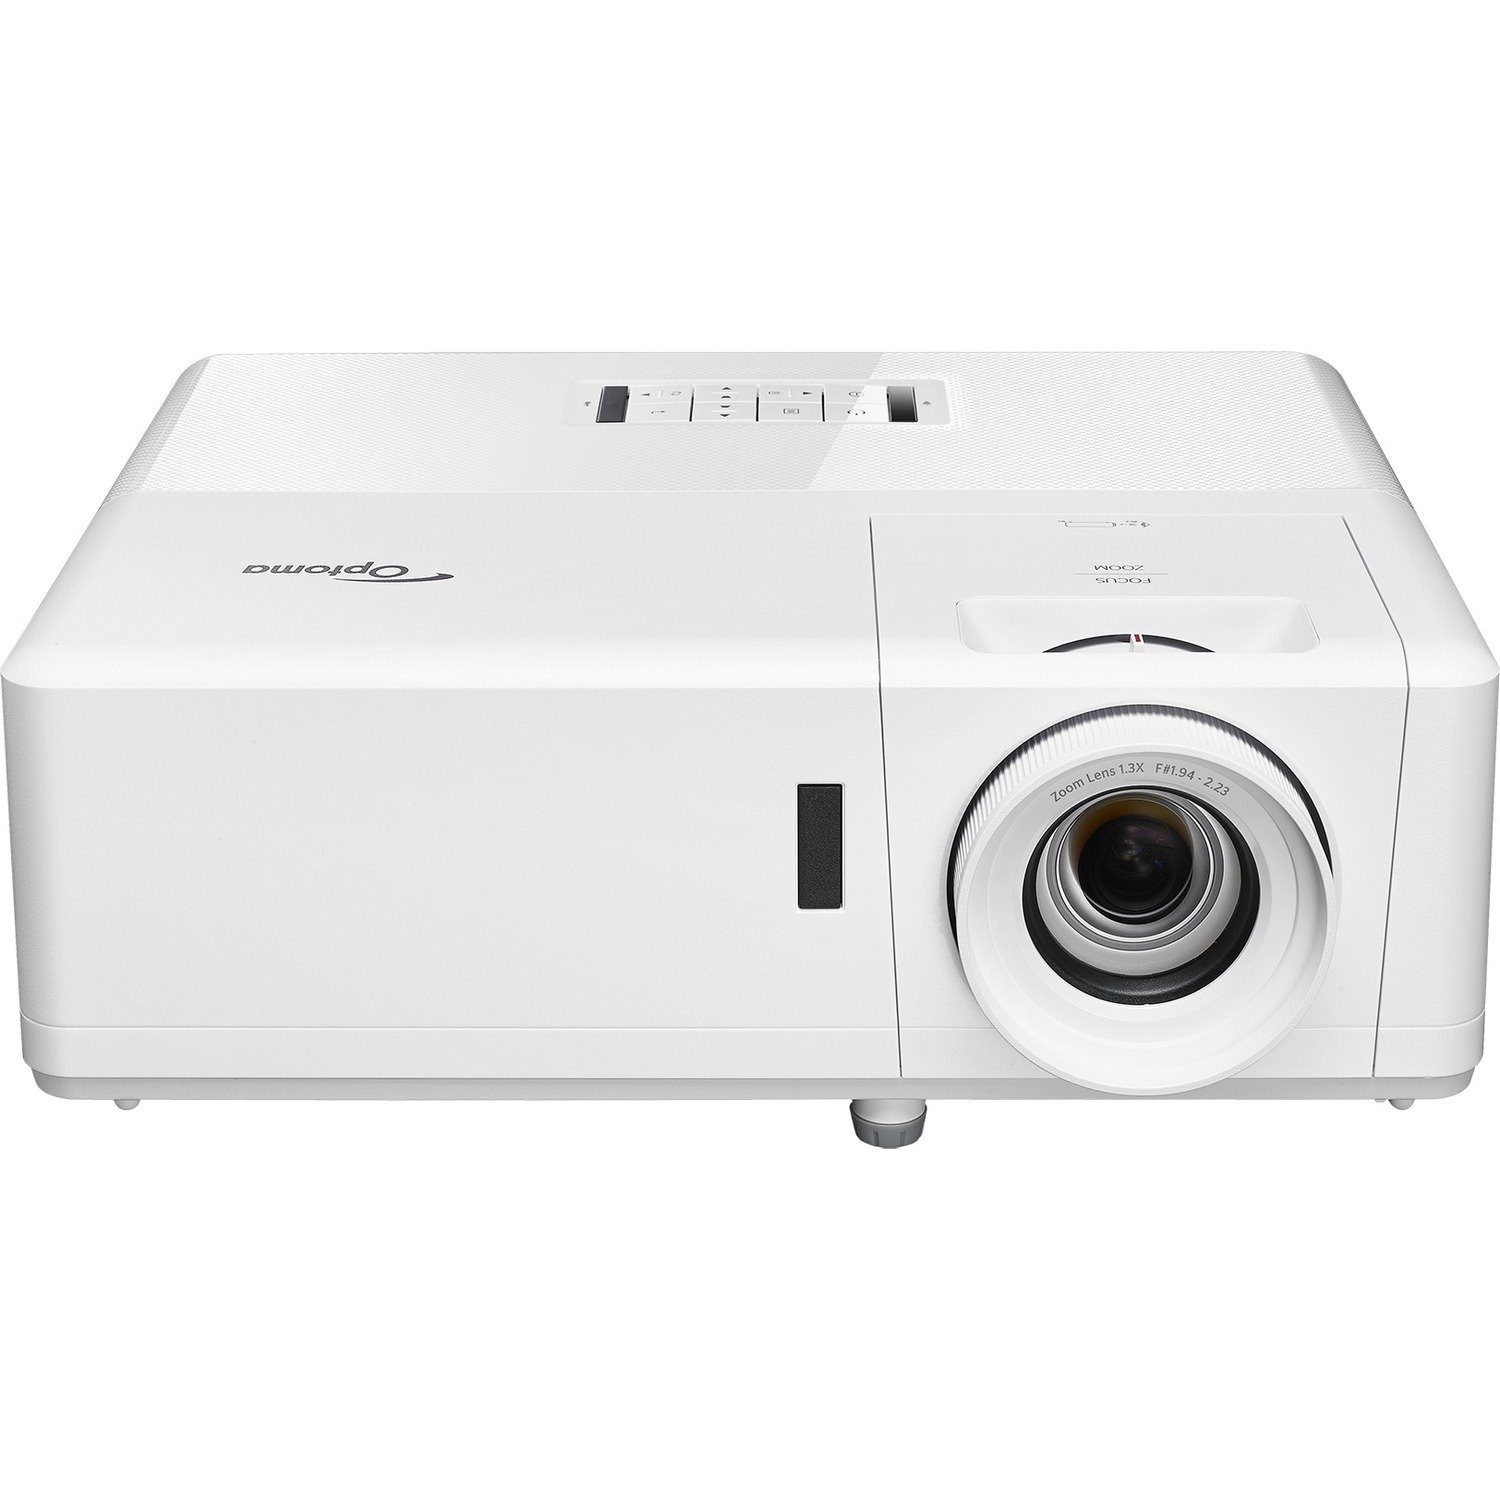 Optoma ZH403 3D Ready DLP Projector - 16:9 - White